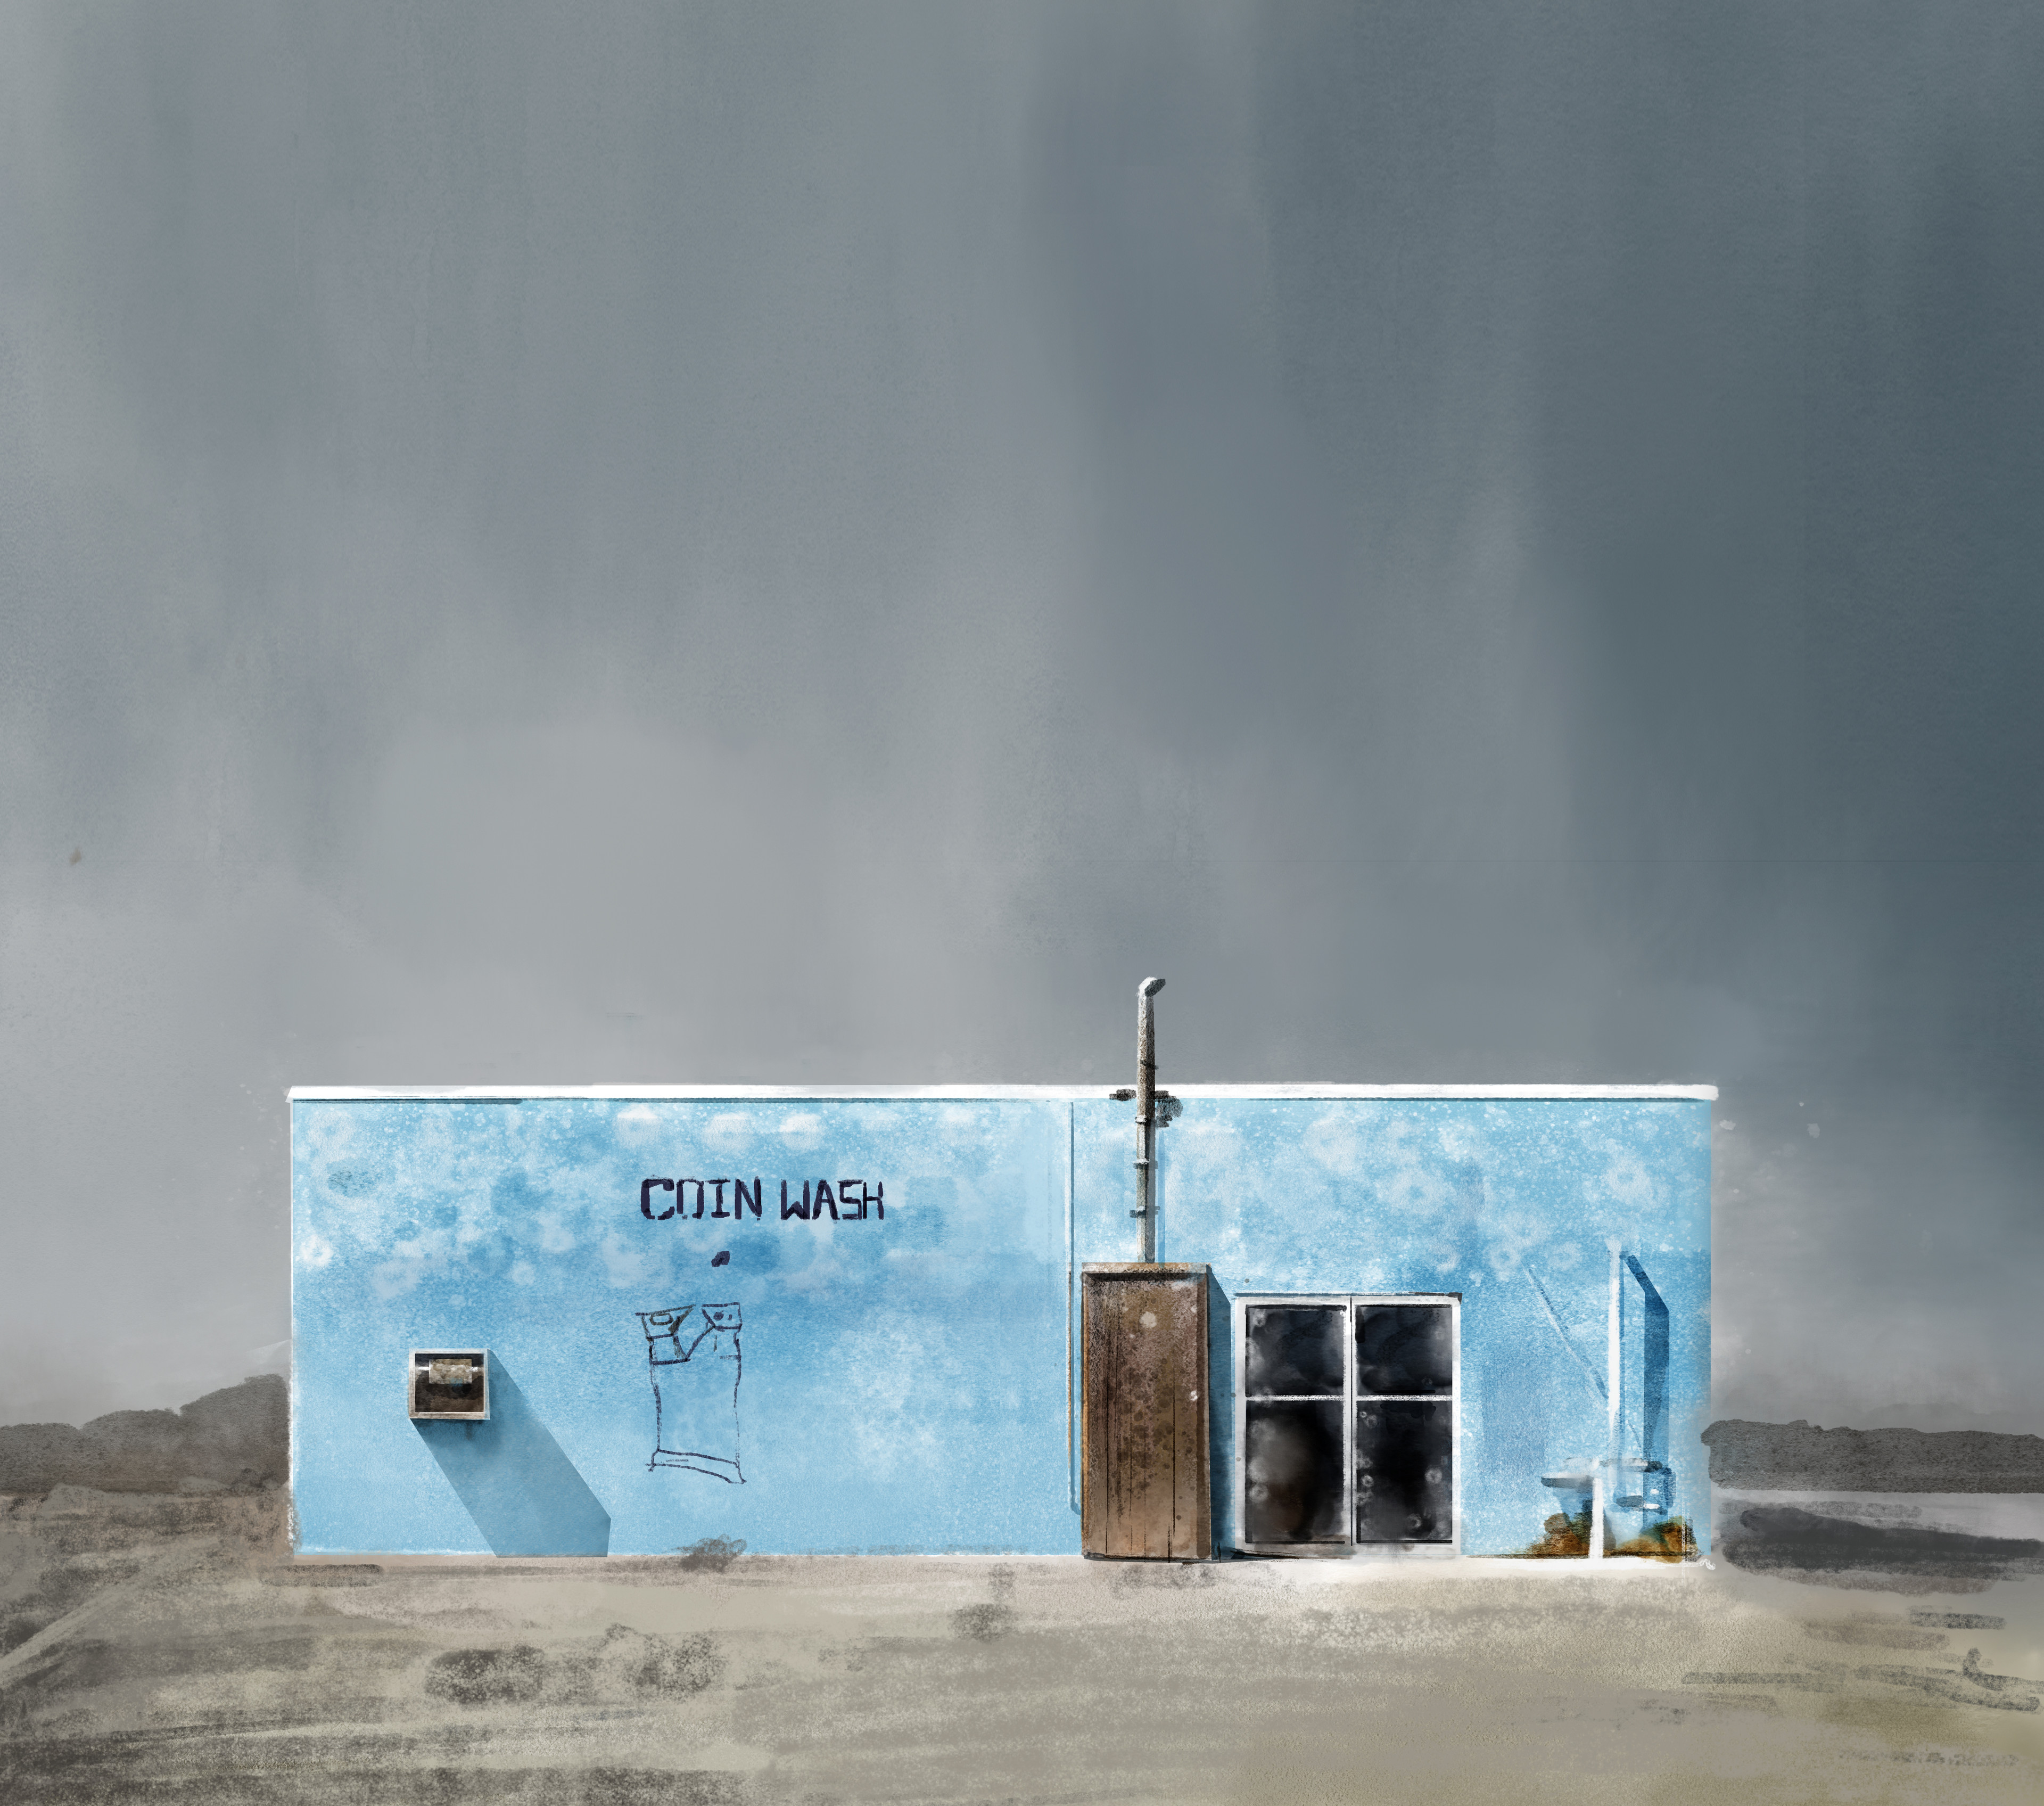 Study Ed Freeman's photography by using Kyle T. Webster's watercolor brushes...